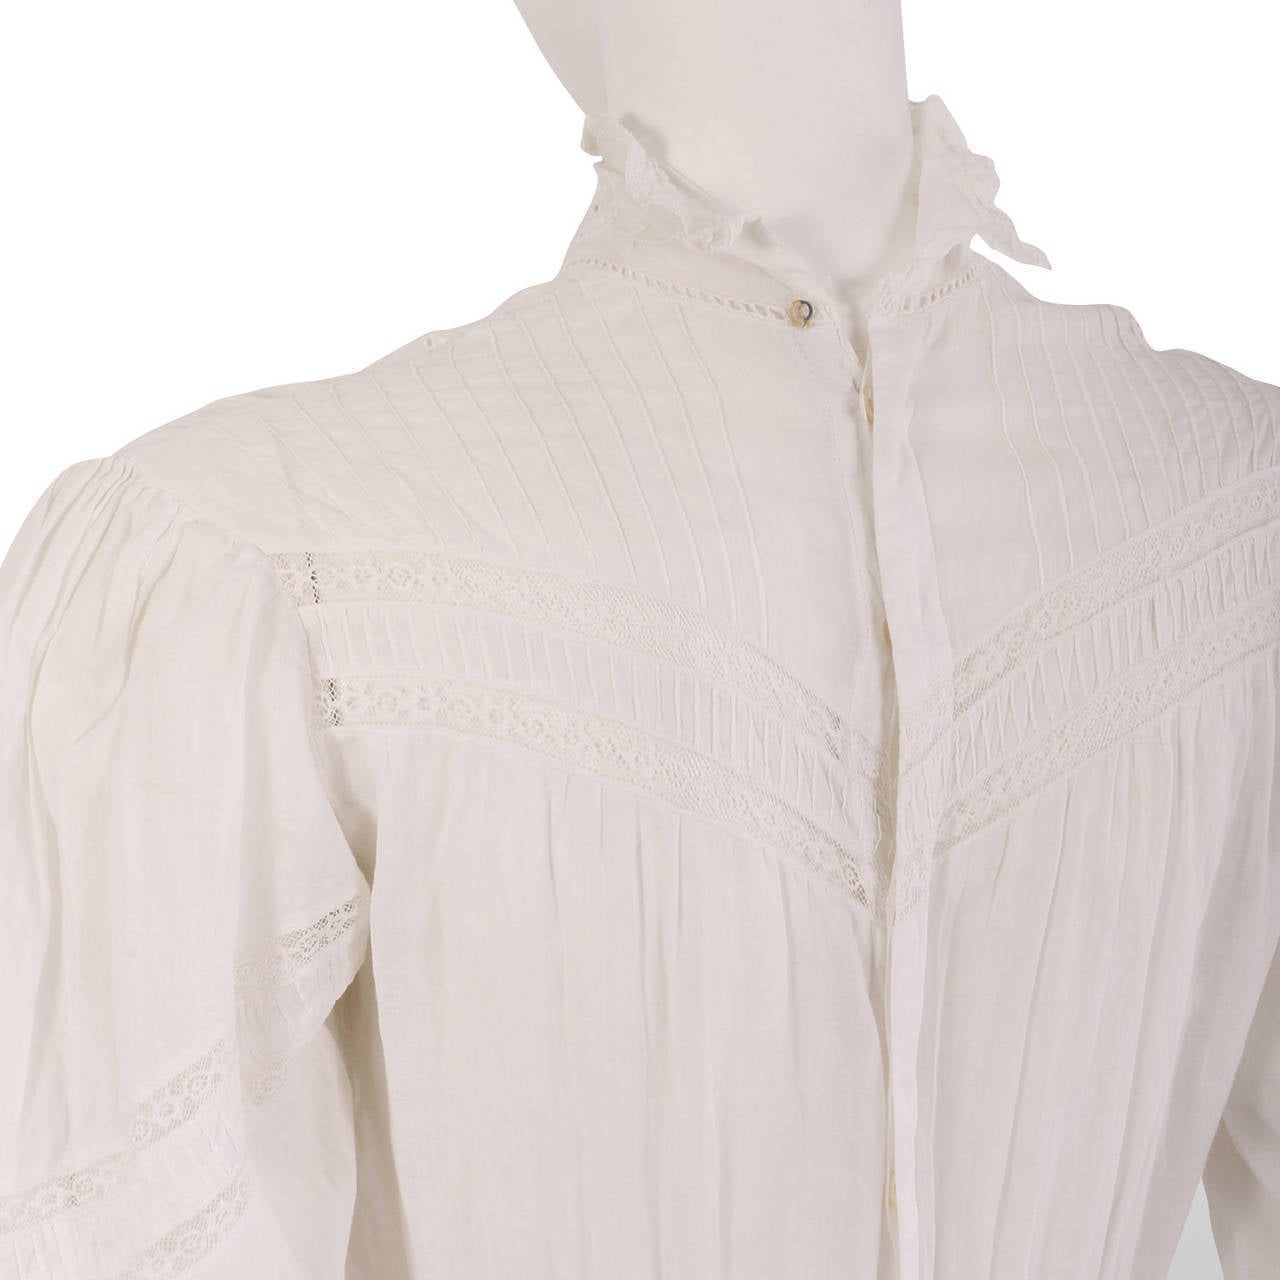 Victorian White Embroidery and Lace High Neck Lawn Dress 2